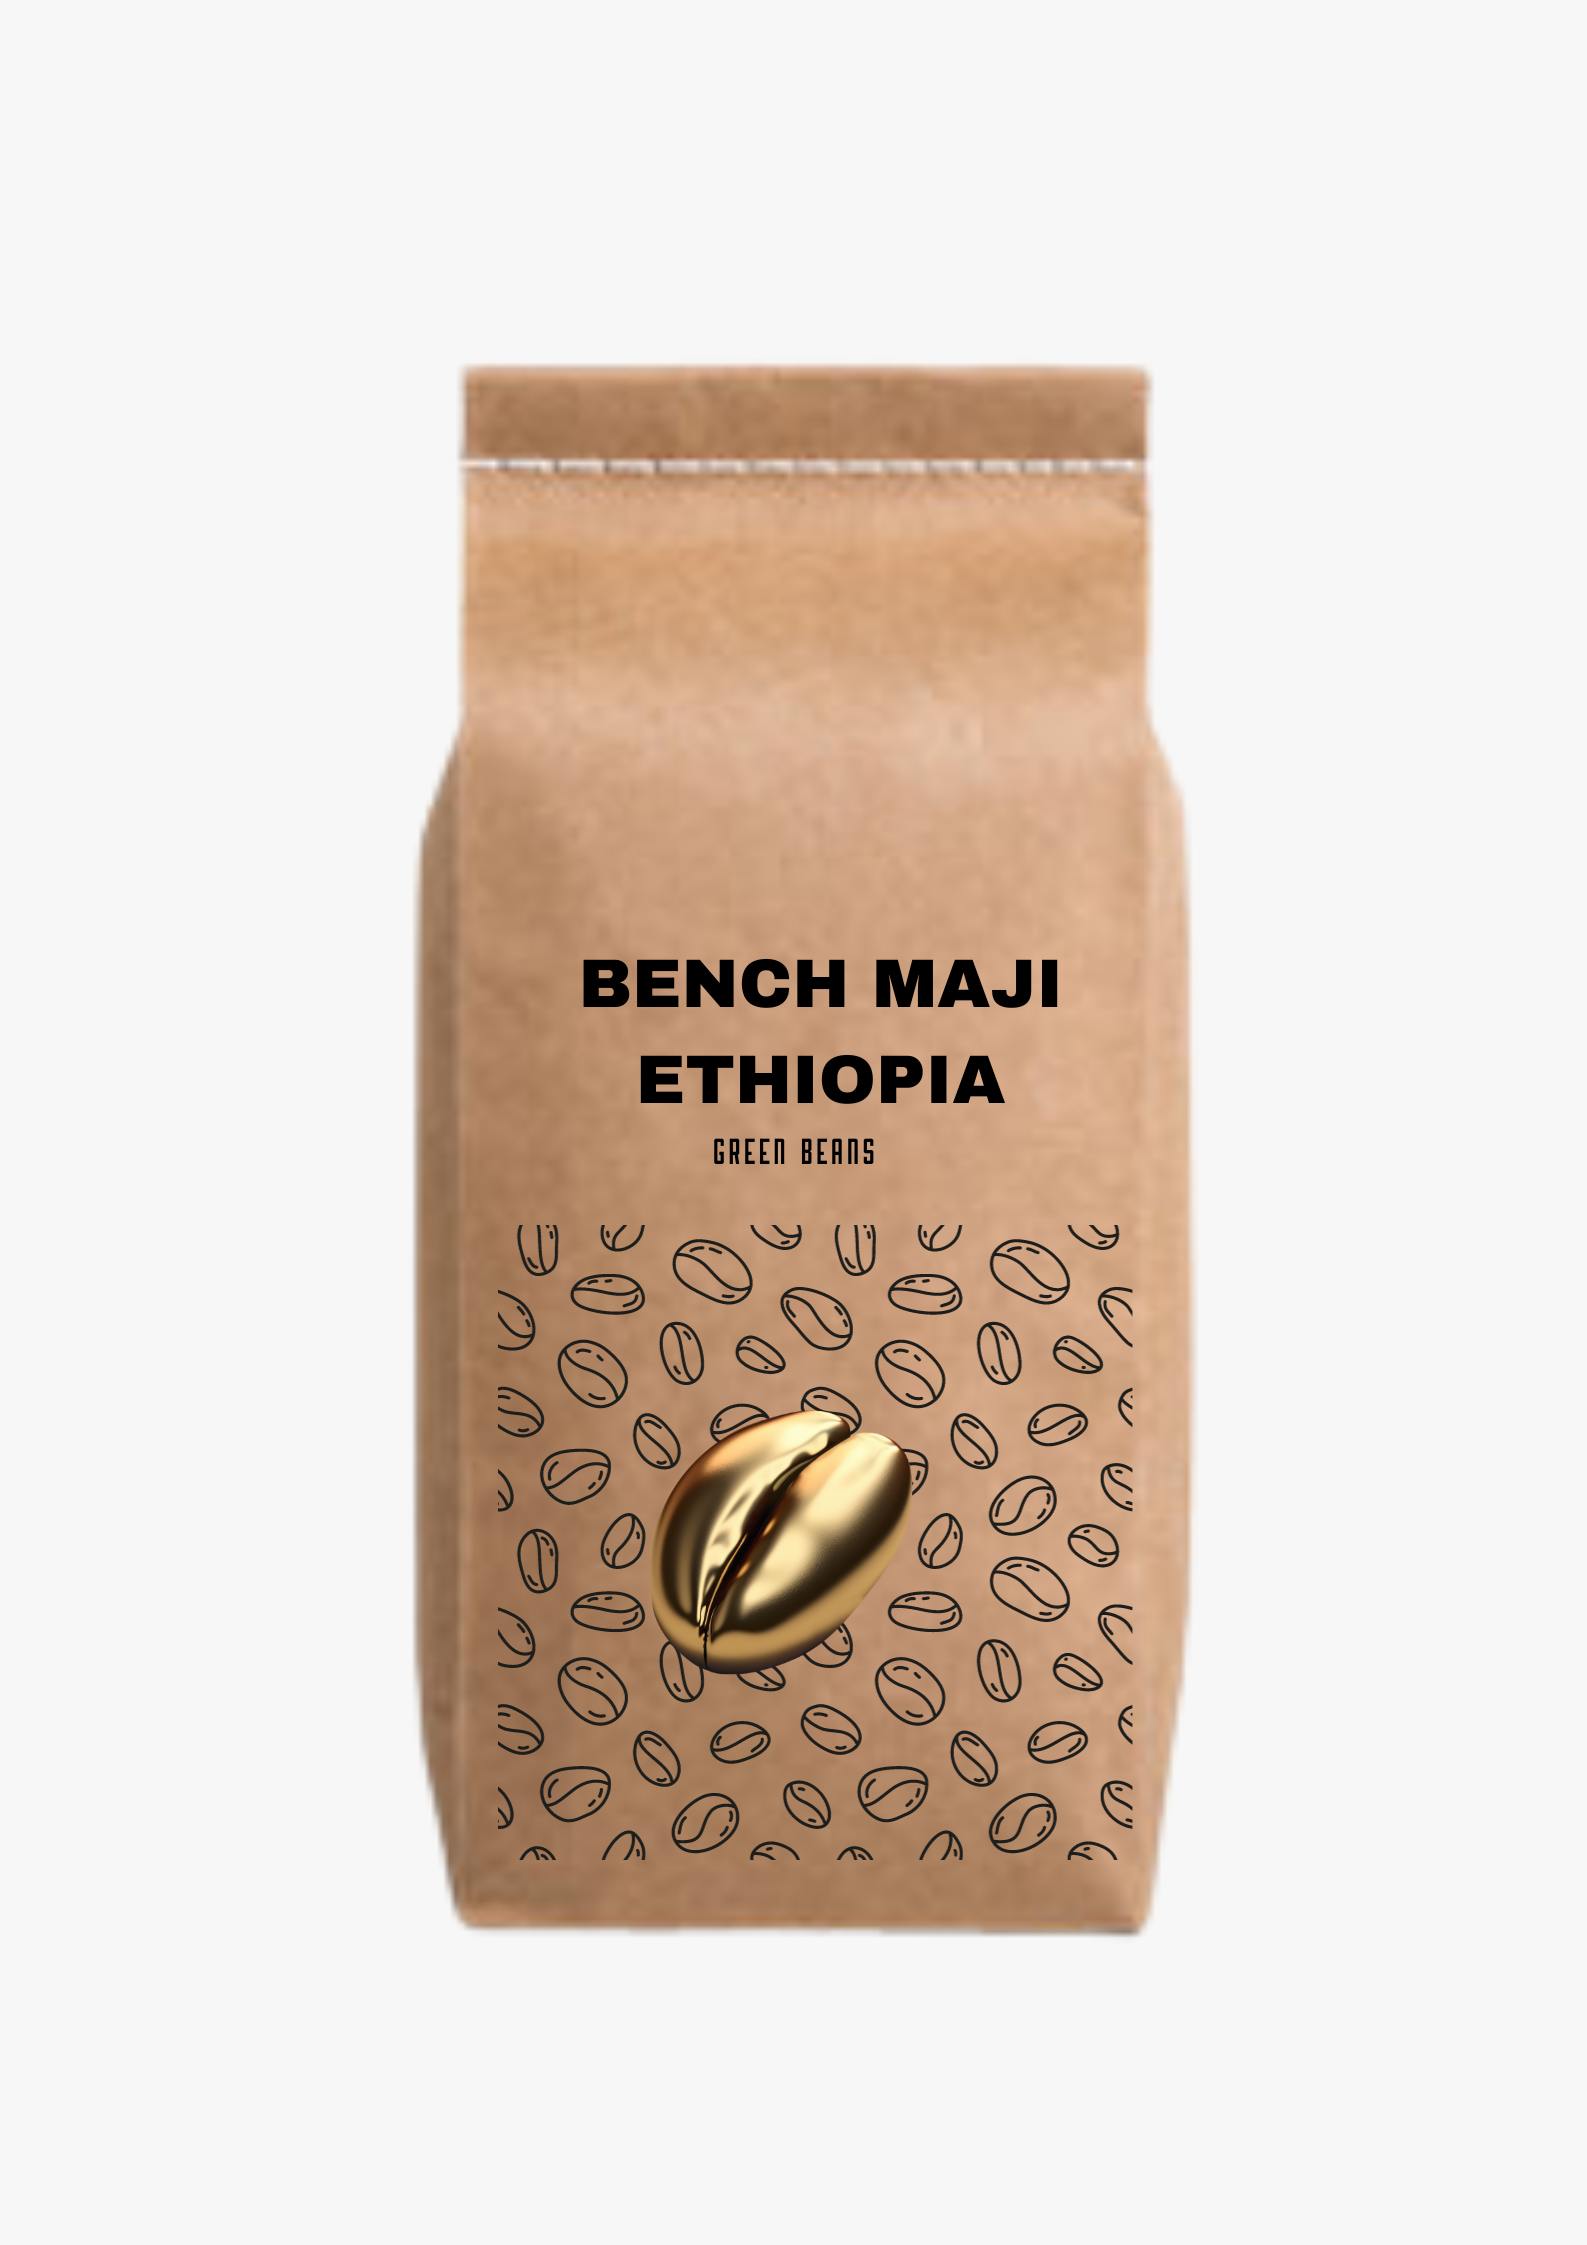 ETHIOPIAN BENCH MAJI FOTEST (UNRAOSTED)